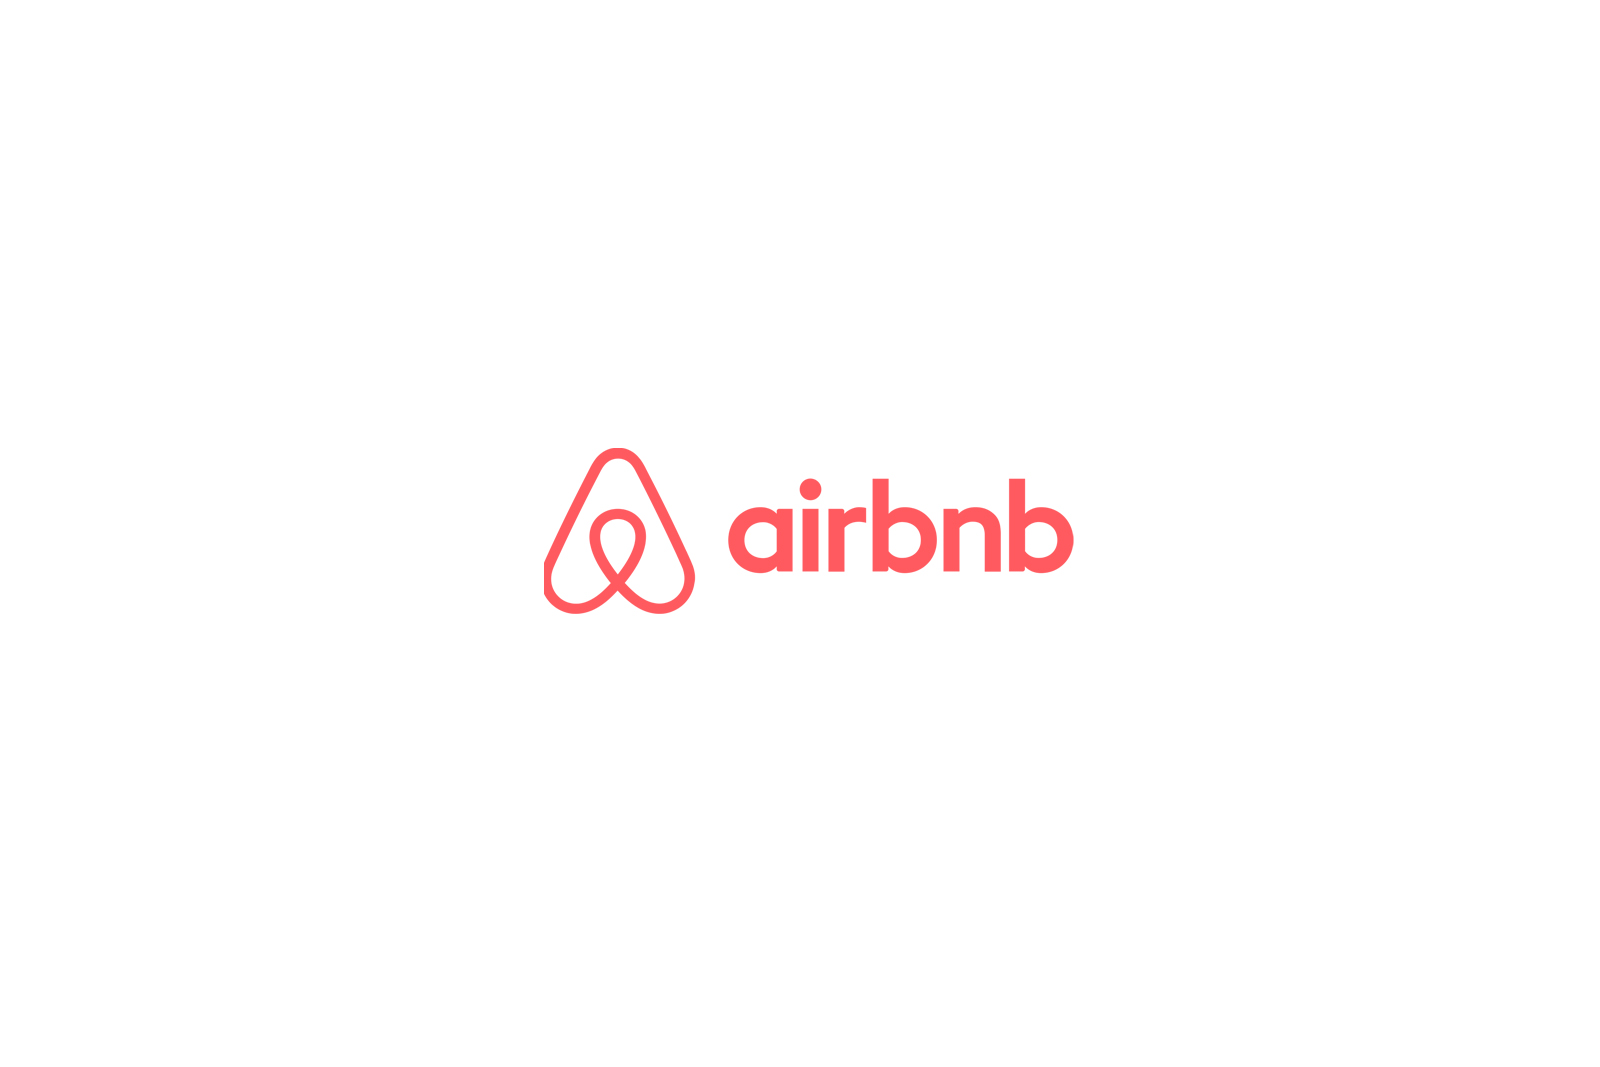 Booking with airbnb